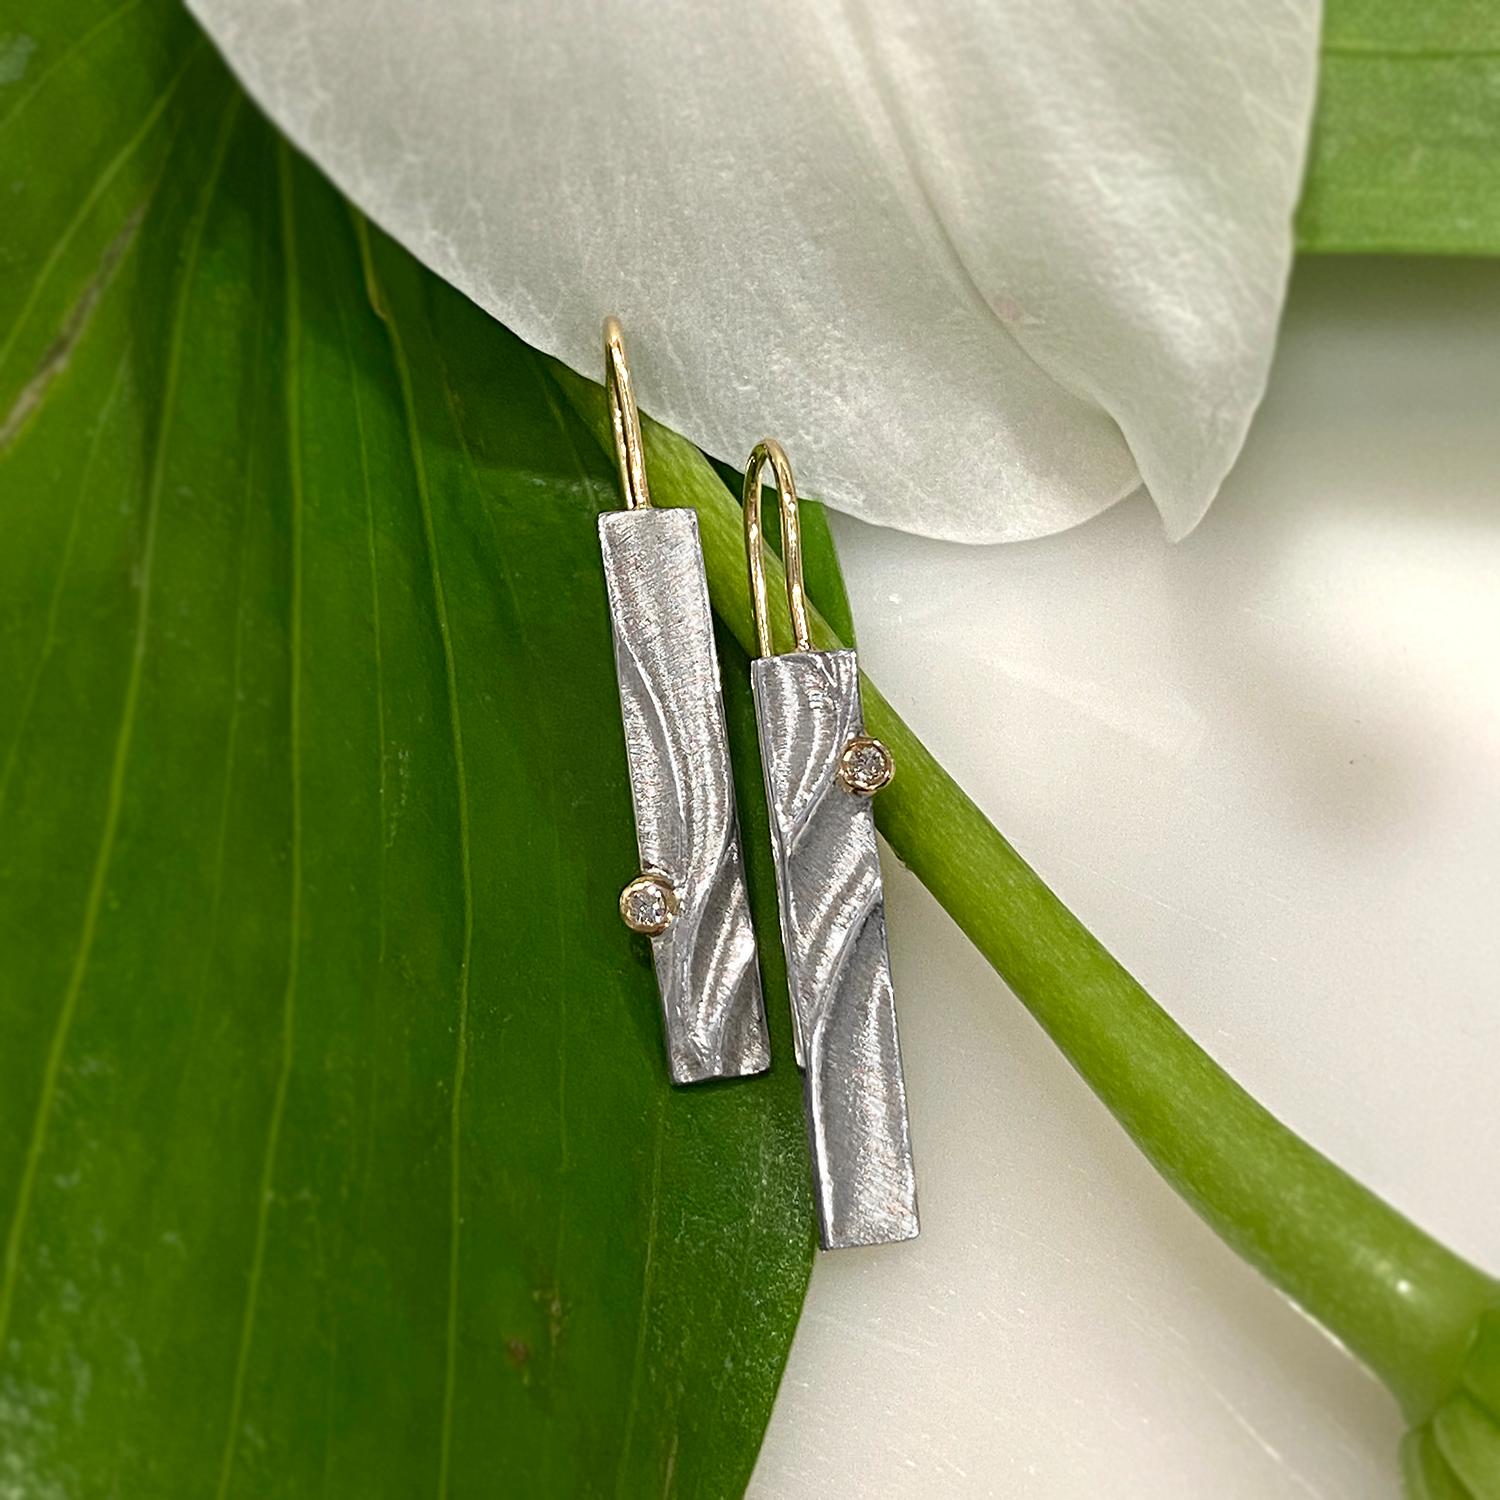 Keiko Mita's  modern Echo Dangle Earrings are handmade from Sterling Silver and accented with 0.04 Carat Diamonds (total weight) set in 14 Karat Yellow Gold bezels. The contemporary earrings have 14 Karat Yellow Gold ear wires and are 38 mm long and